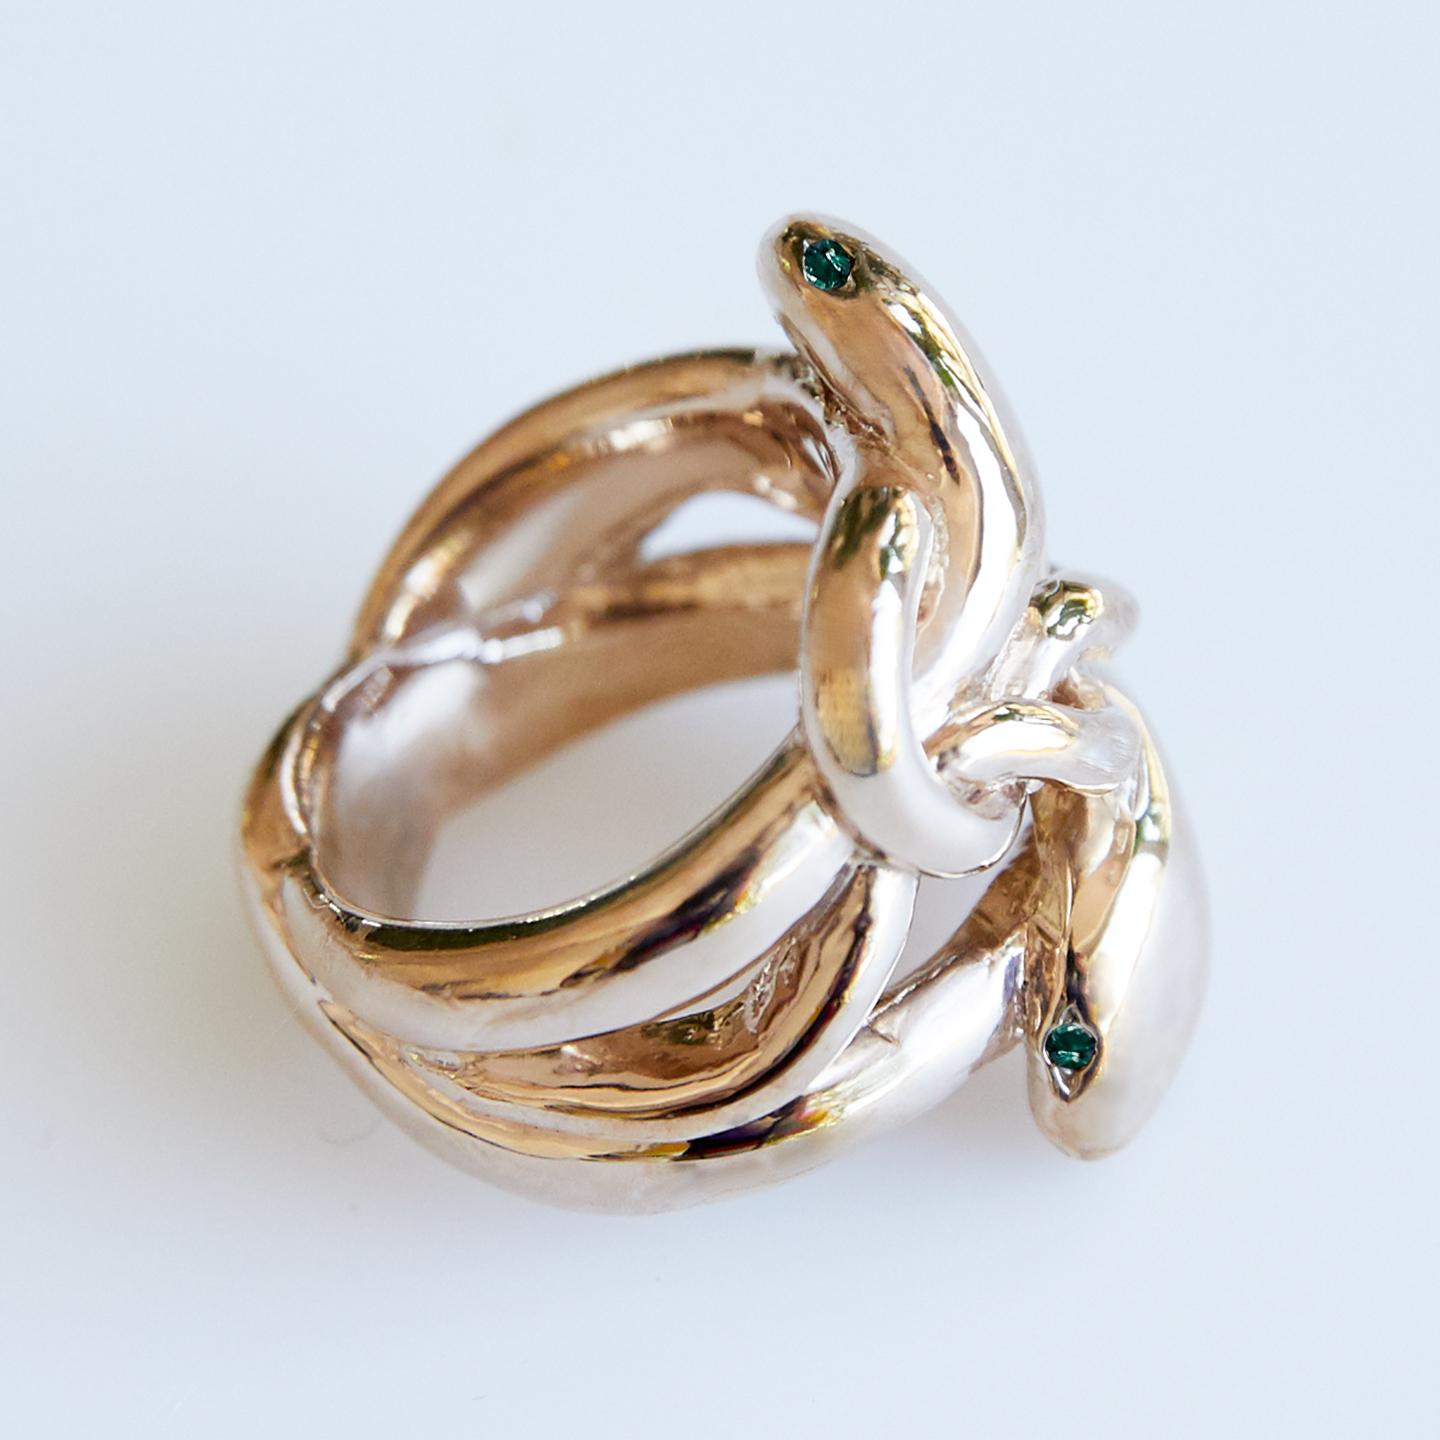 Contemporary Emerald Gold Snake Ring Victorian Style Cocktail Ring J Dauphin For Sale